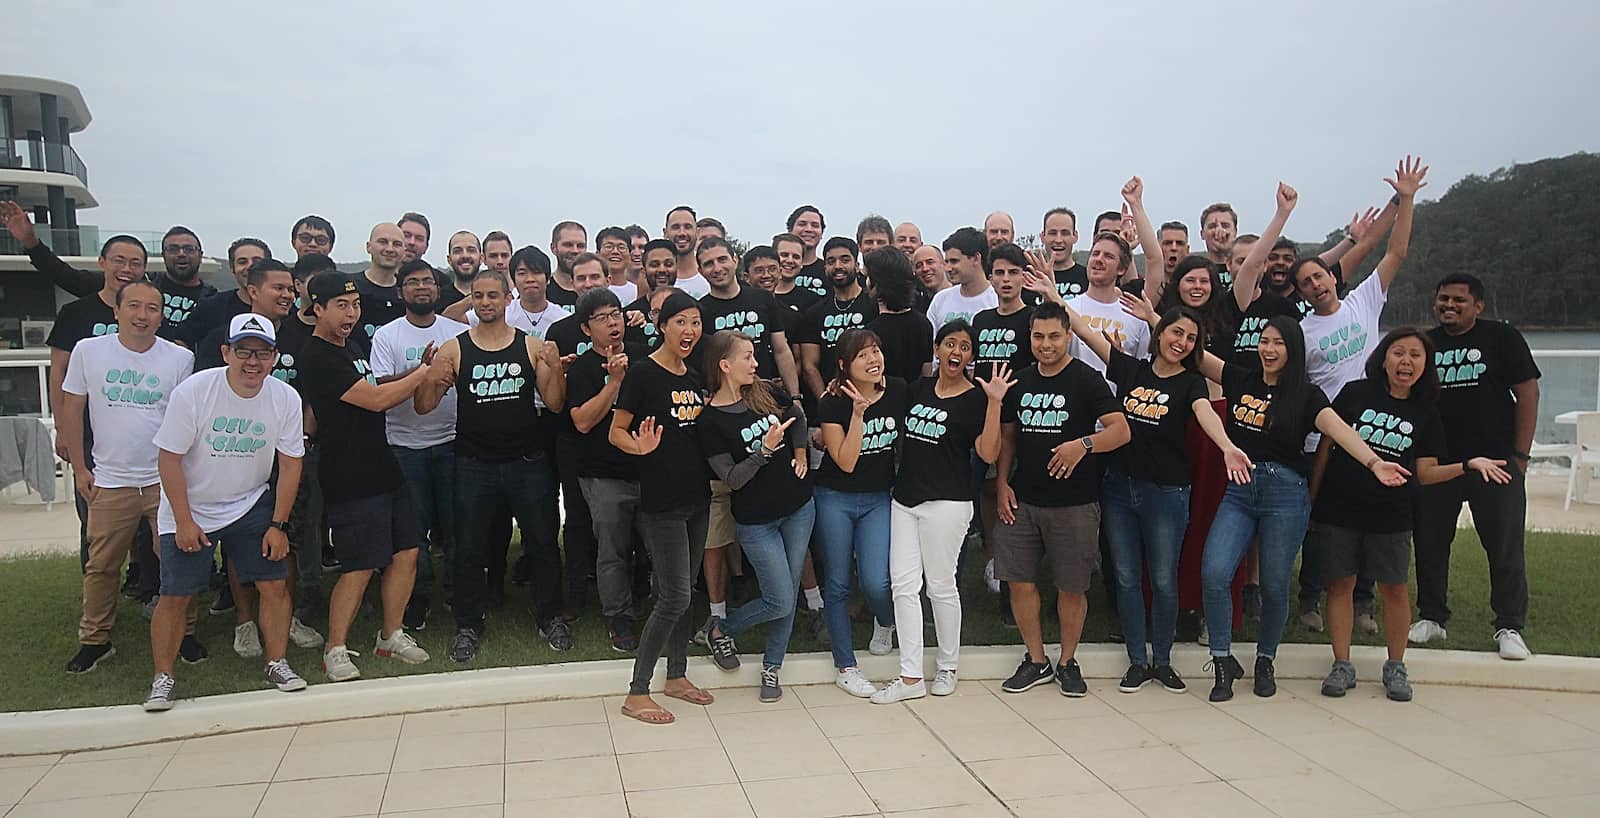 A group of people wearing shirts with matching bubble text reading “Devcamp”, some people with their hands in the air. The sea can be seen behind them